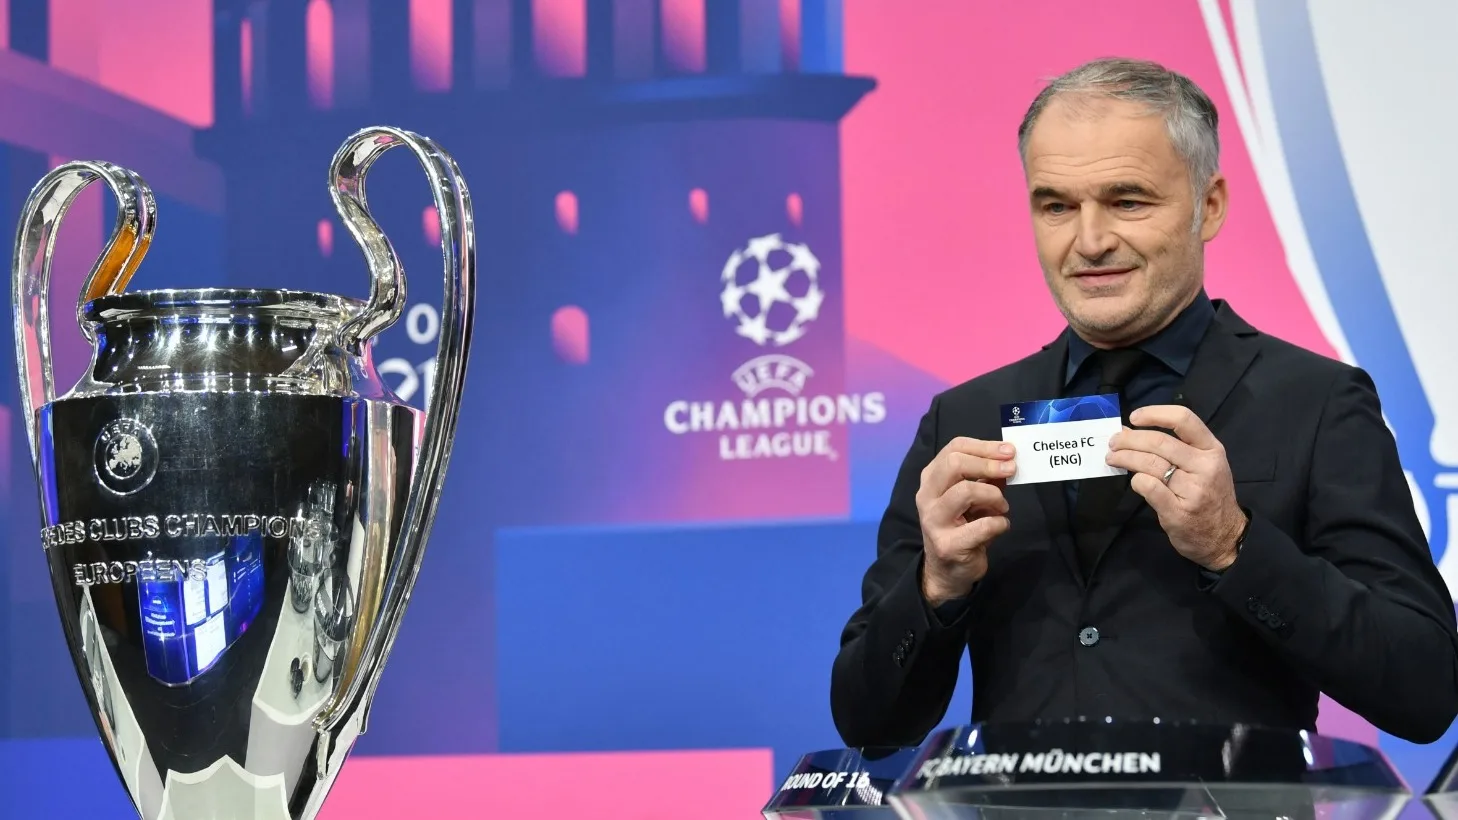 Champions League Round of 16 Draw set to be Re-done